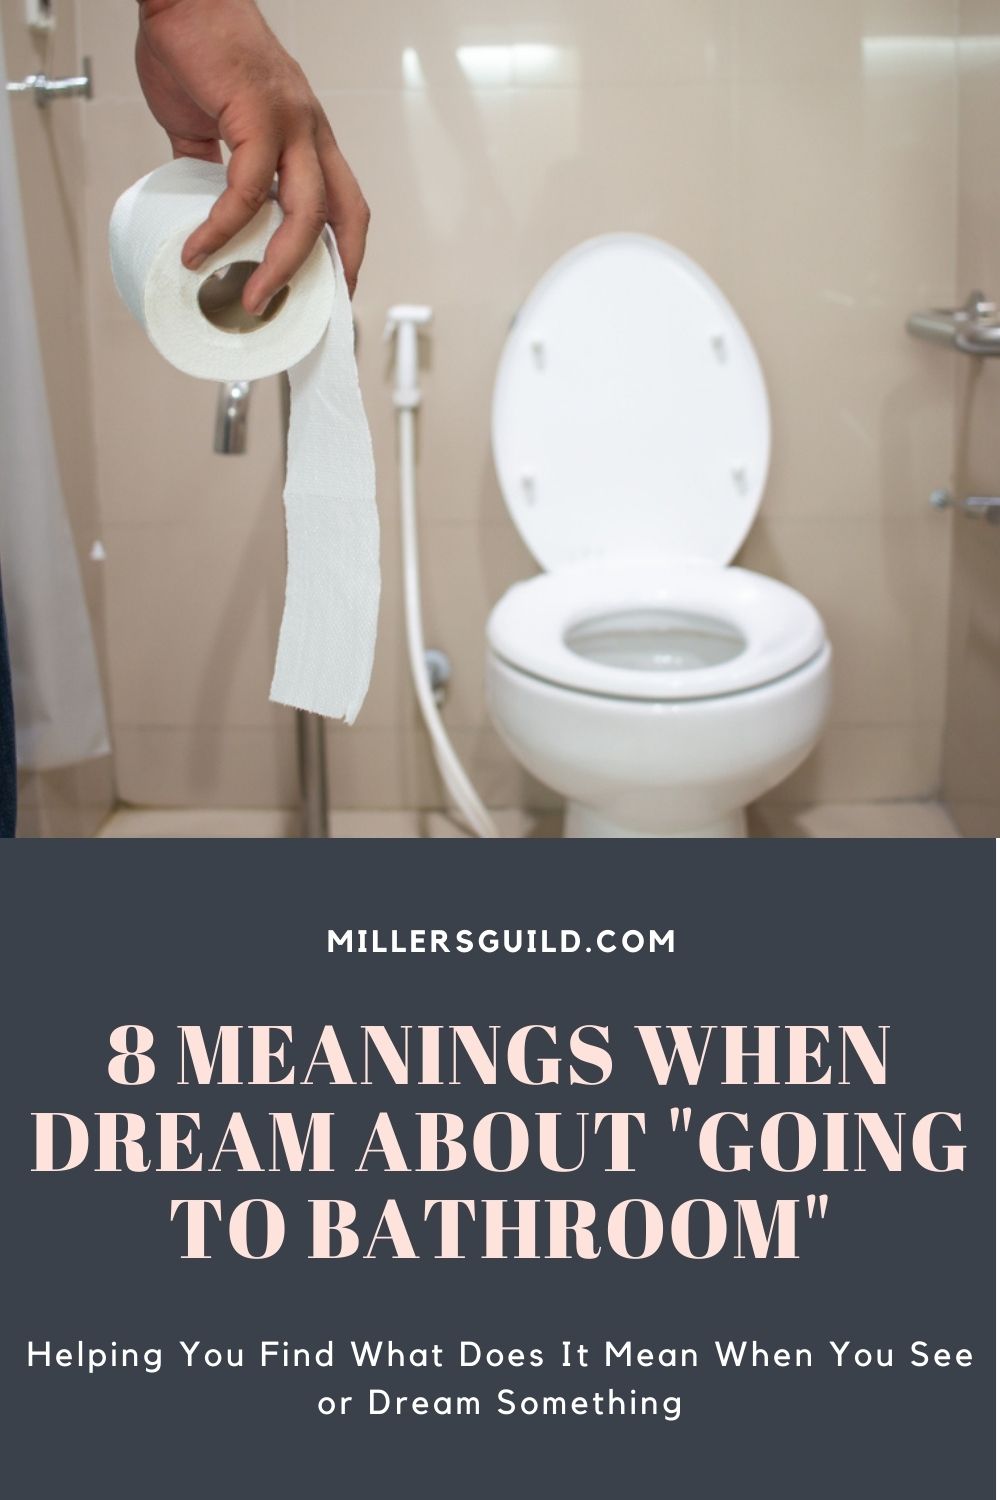 8 Meanings When Dream About Going to Bathroom8 Meanings When Dream About Going to Bathroom 3